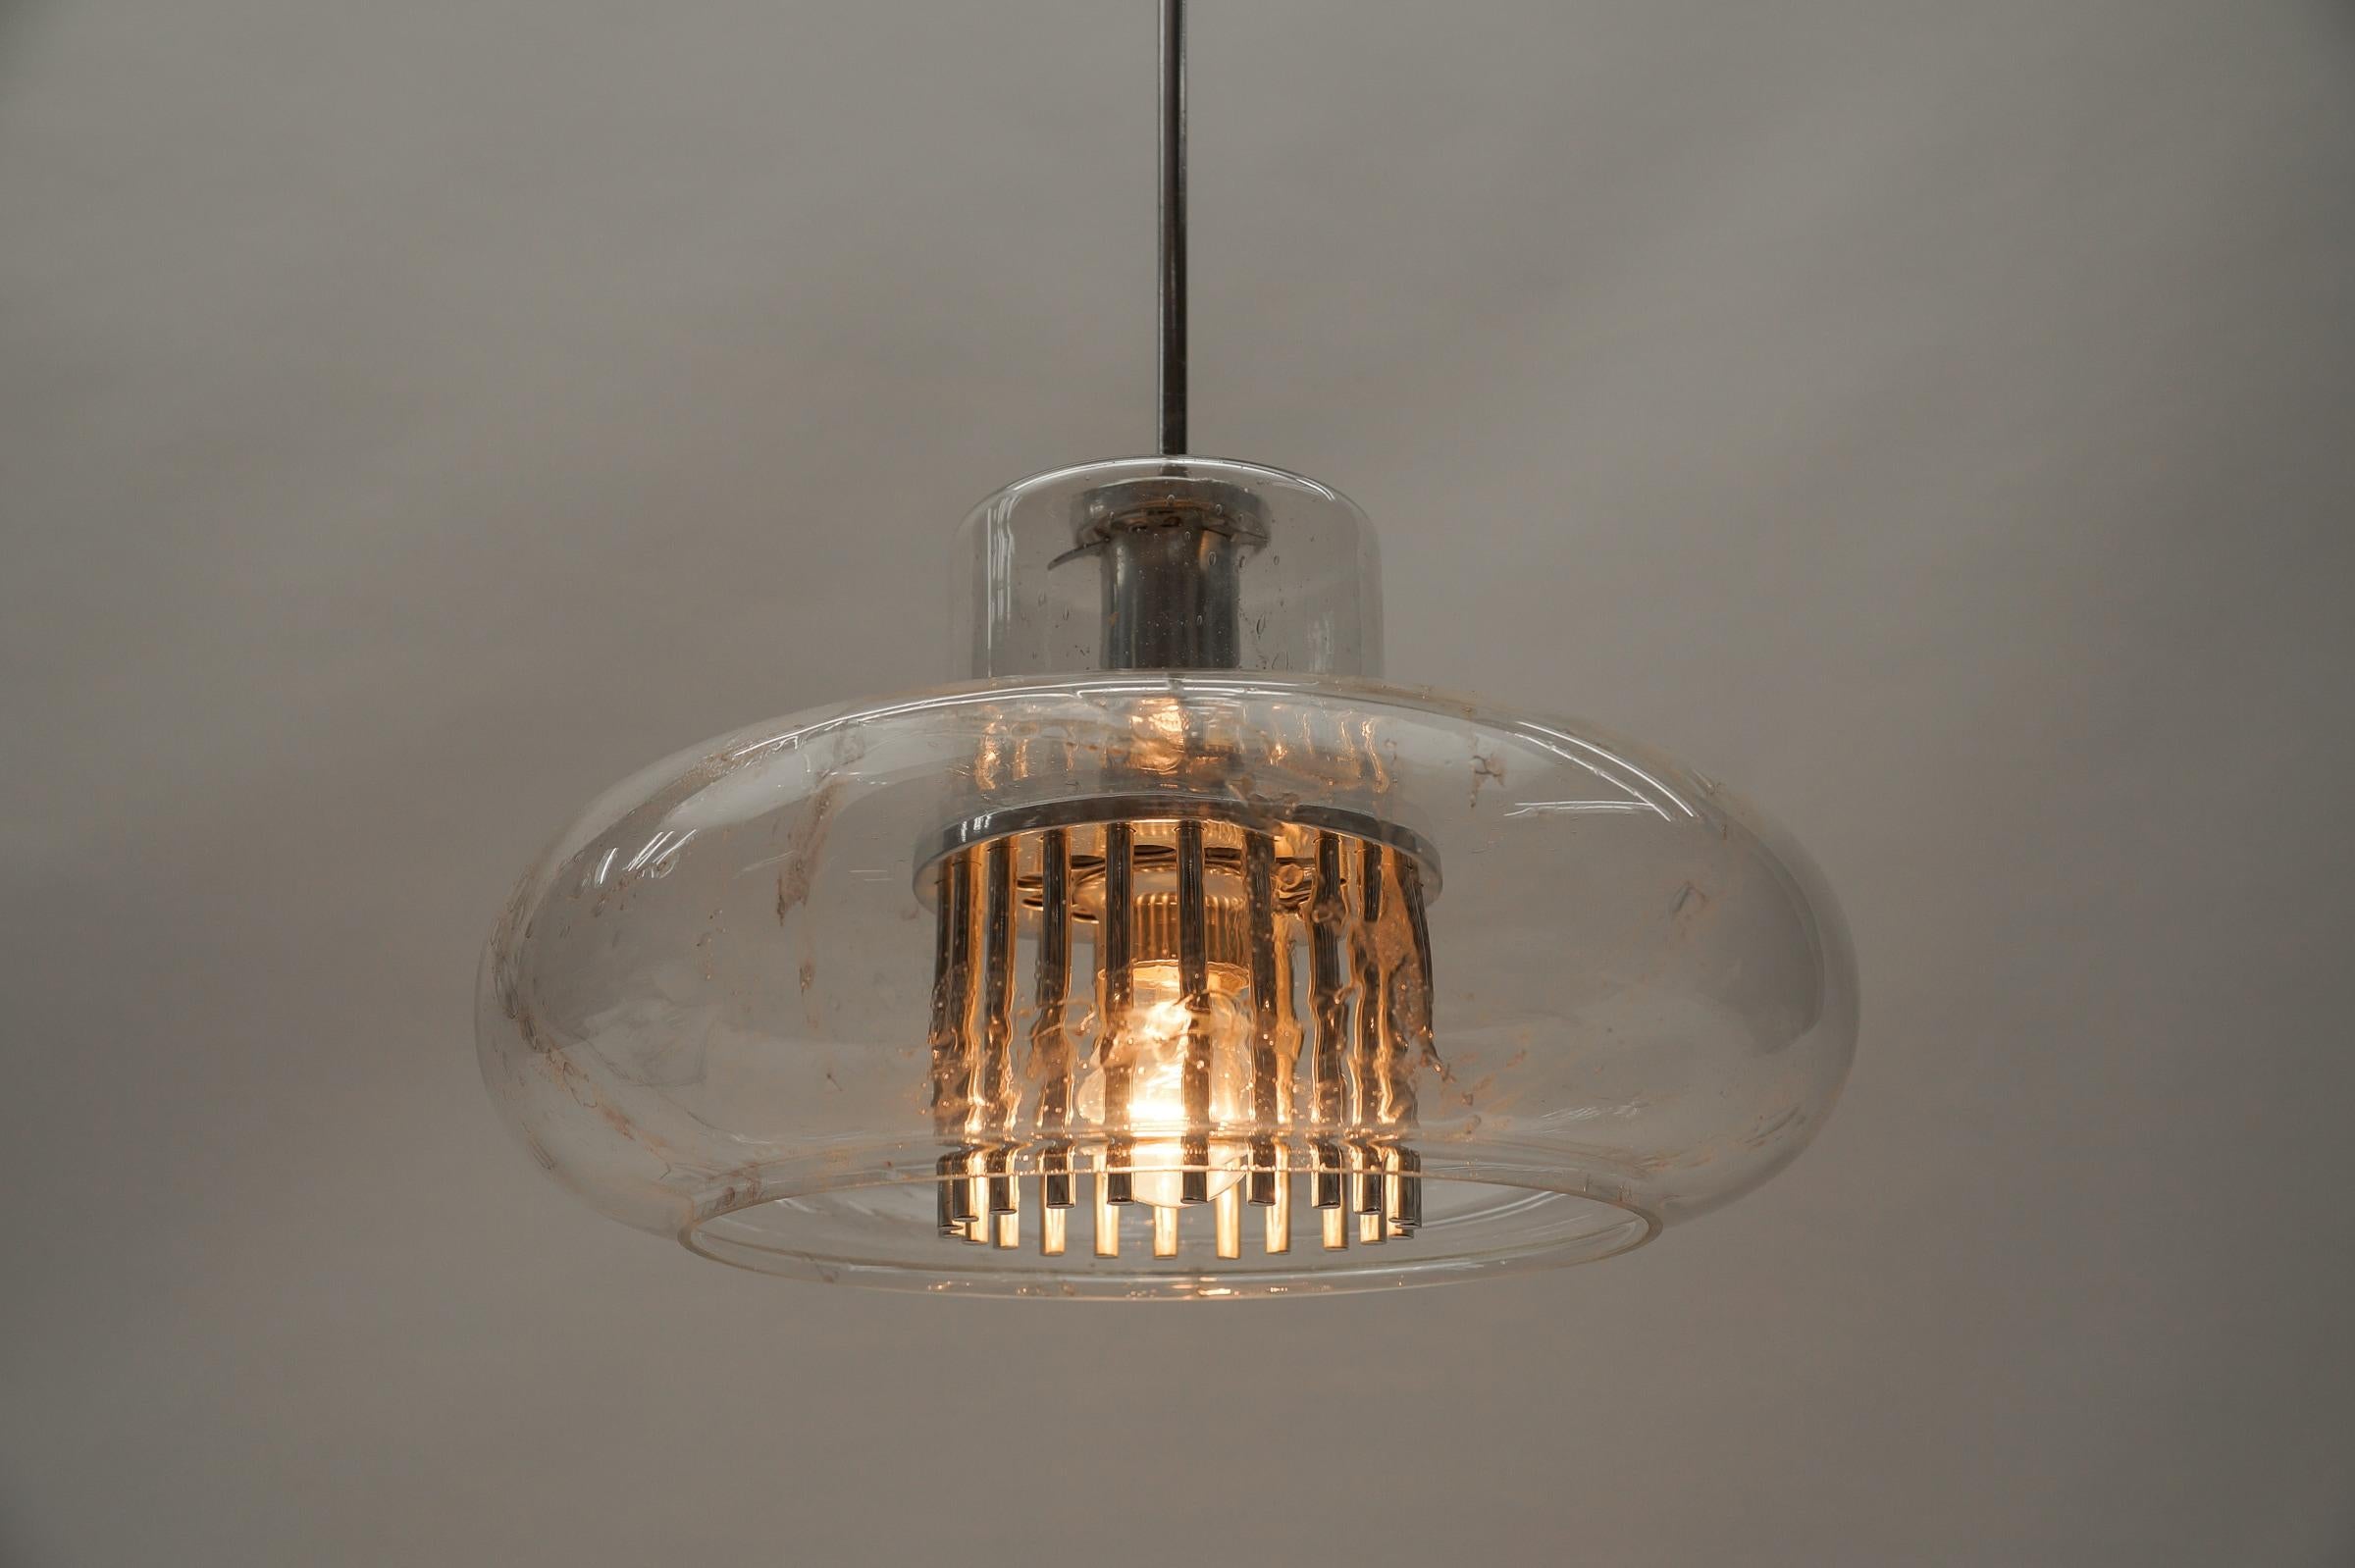 Mid Century Modern Chrome & Glass Pendant Lamp by Doria, 1960s Germany  For Sale 3